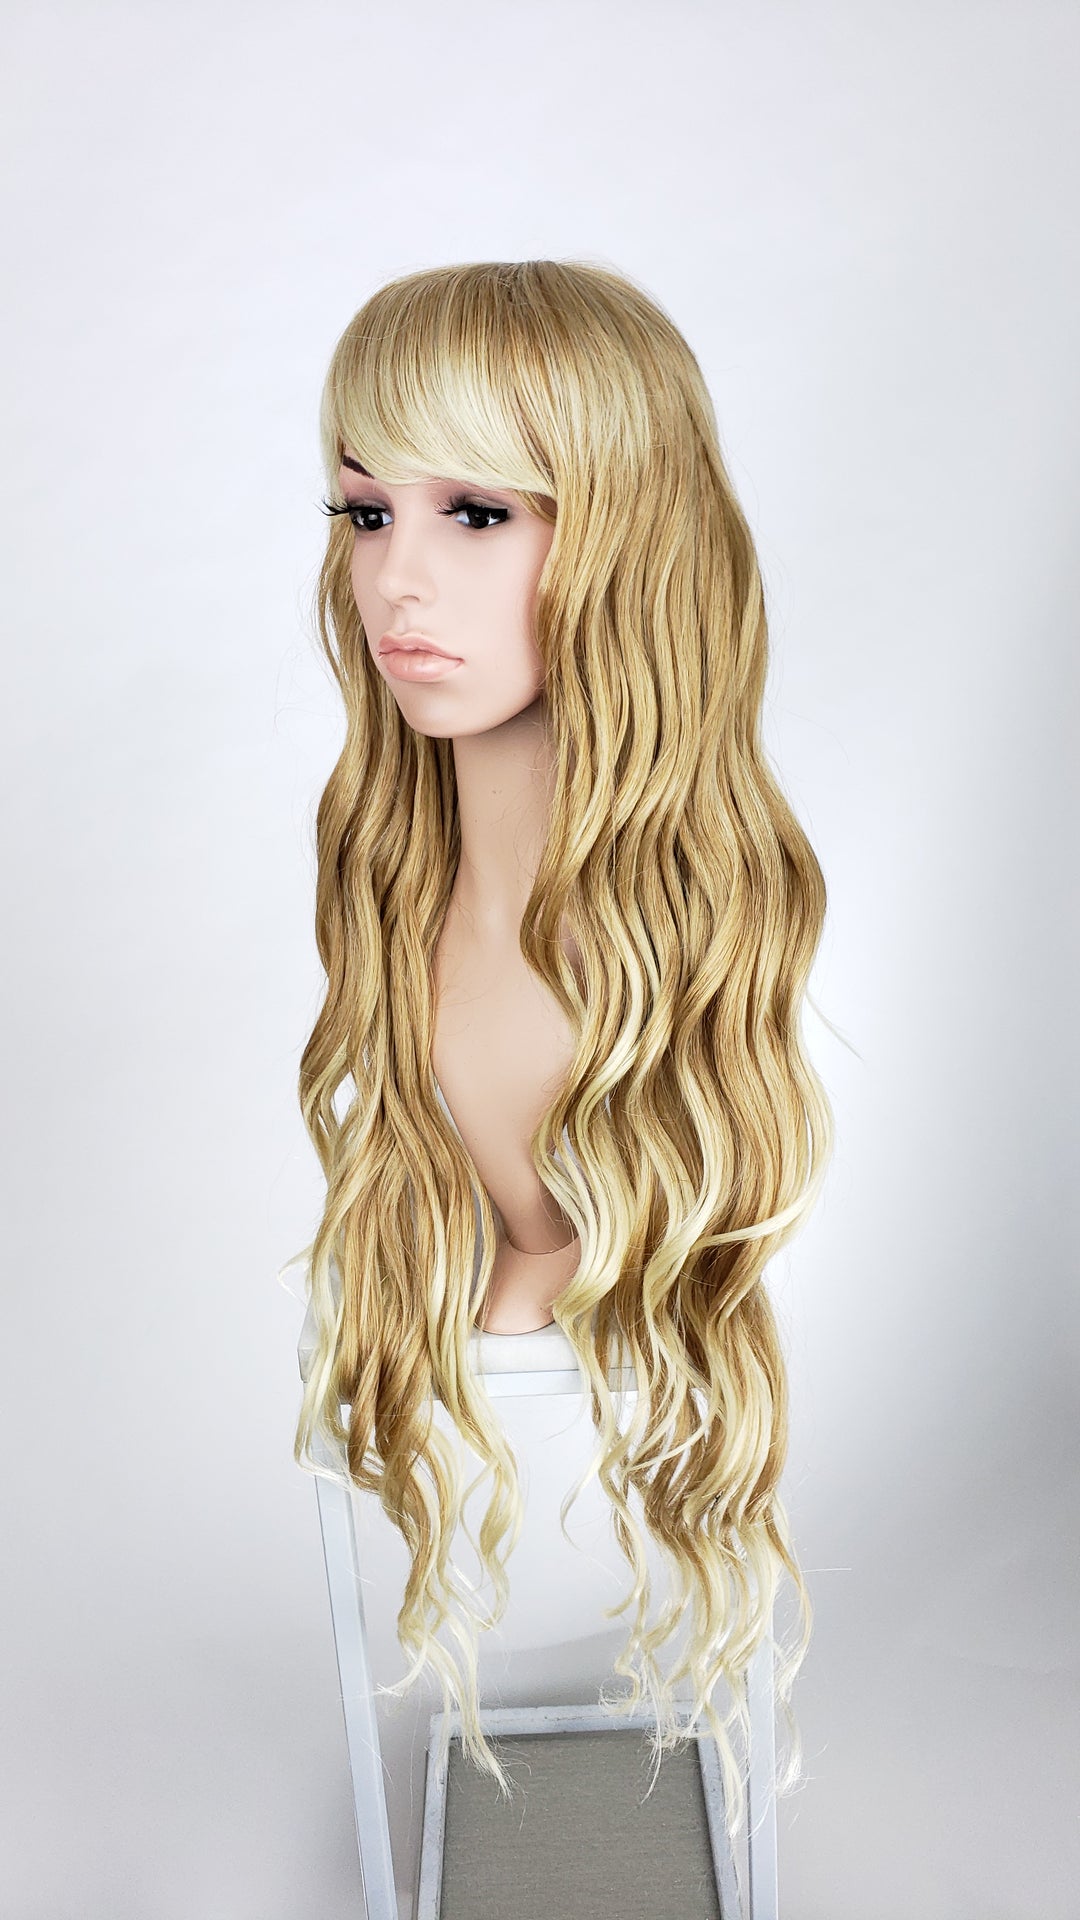 Pose Wigs Strawberry Blonde Ombre Long Curly with Bangs Fashion Wig HSSAH91